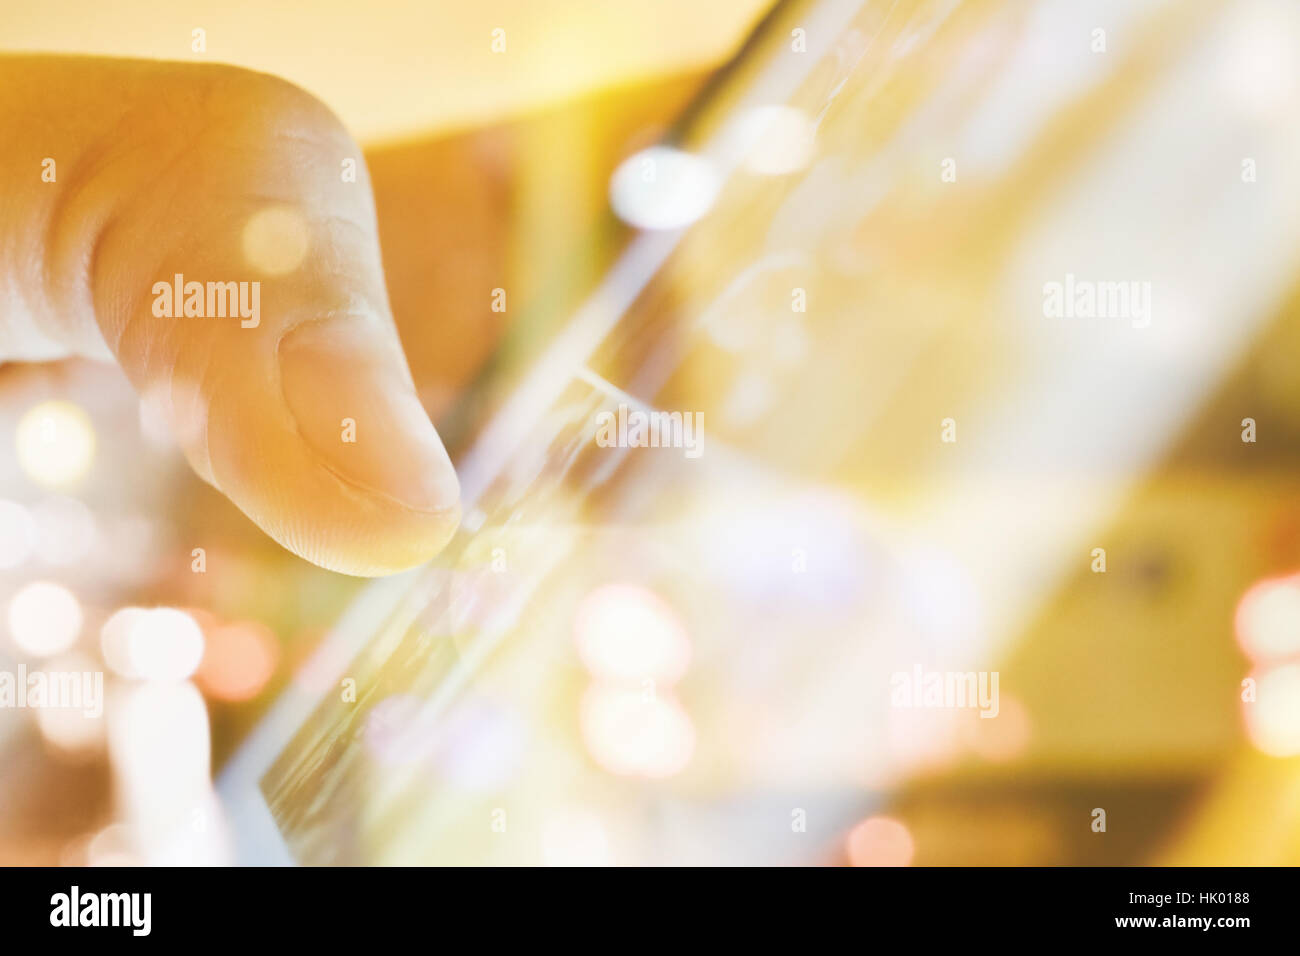 close up of Male fingers touching tablet screen double exposure and defocused city night light background. Stock Photo